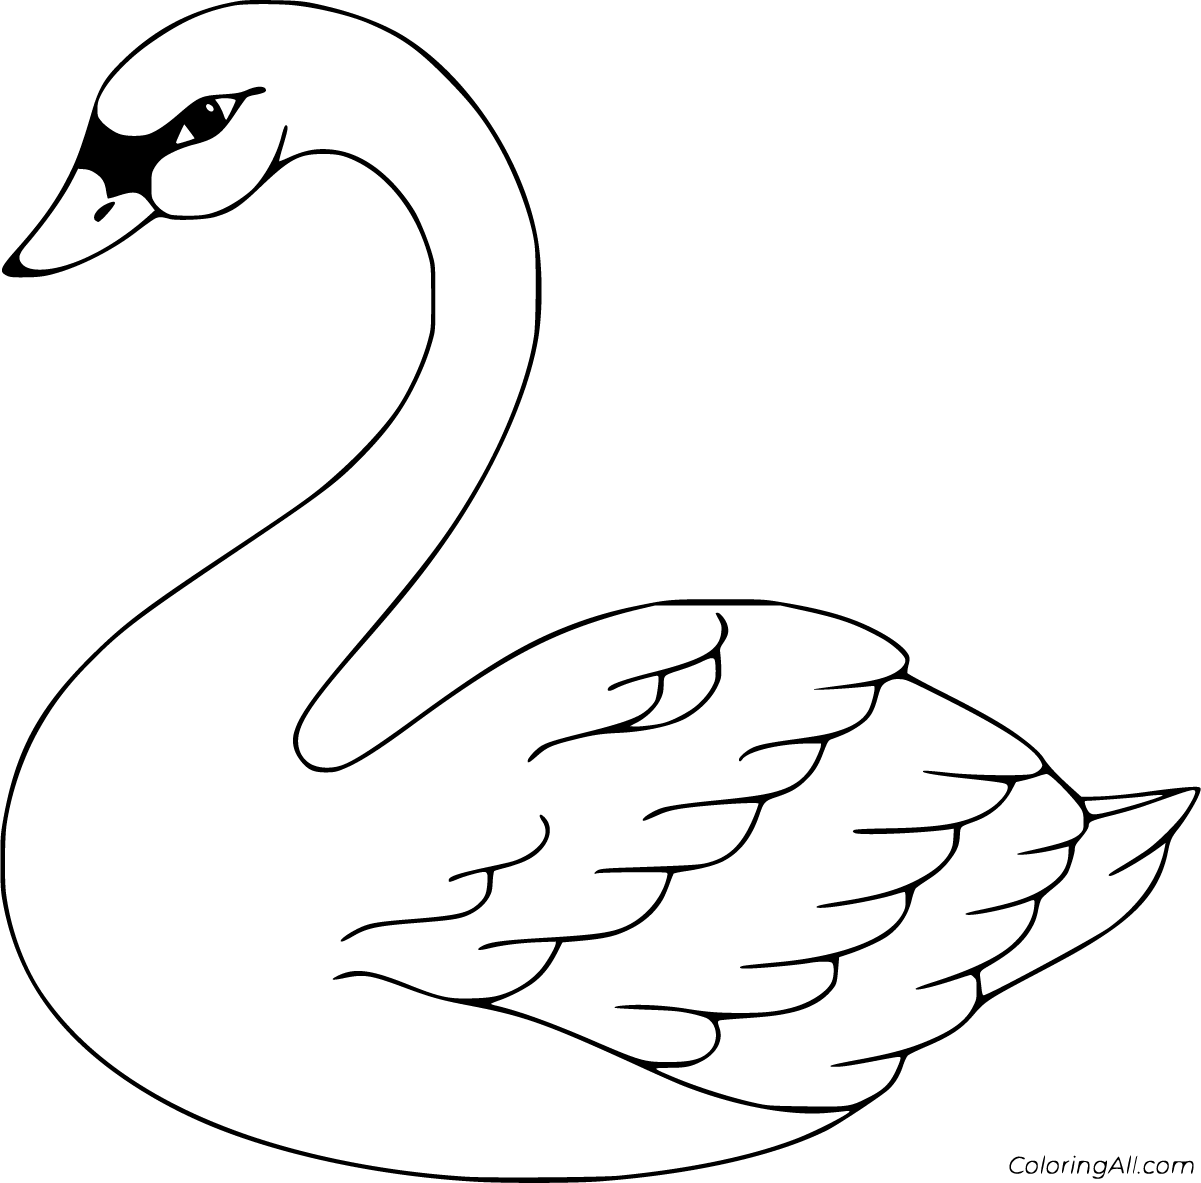 Free printable swan coloring pages in vector format easy to print from any device and autoâ bird coloring pages free motion quilting patterns coloring pages